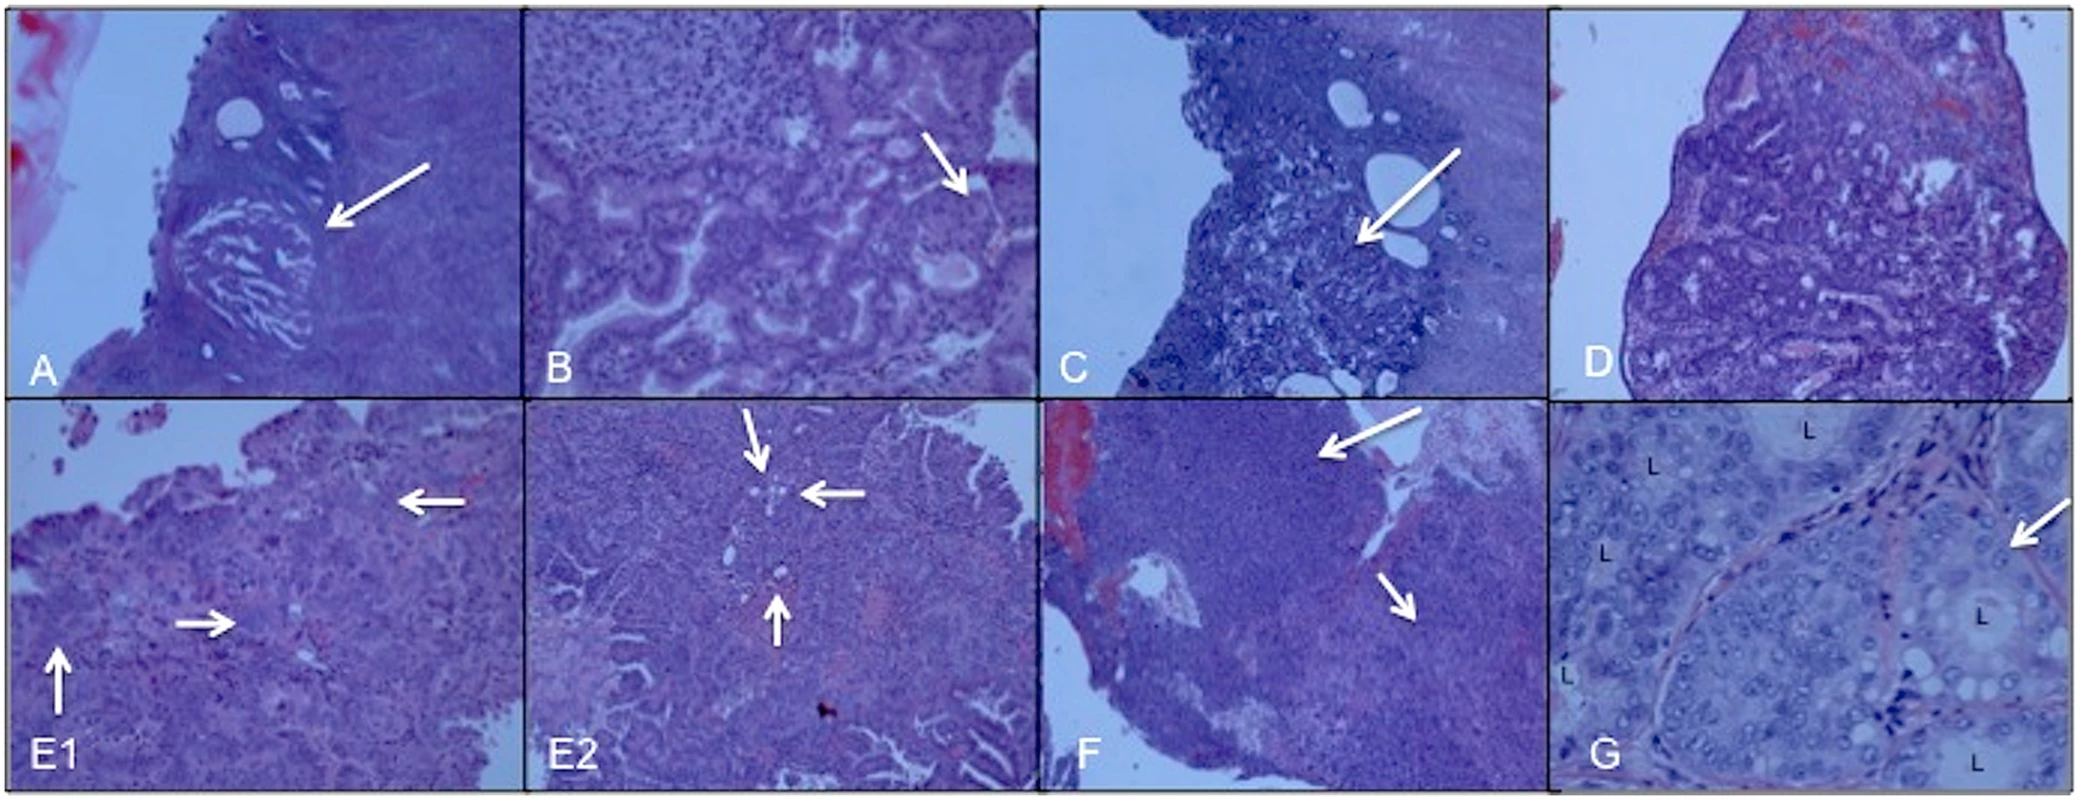 Microscopic views of hematoxylin-eosin stained sections of all seven uterine cancer specimens diagnosed by classic histopathology.